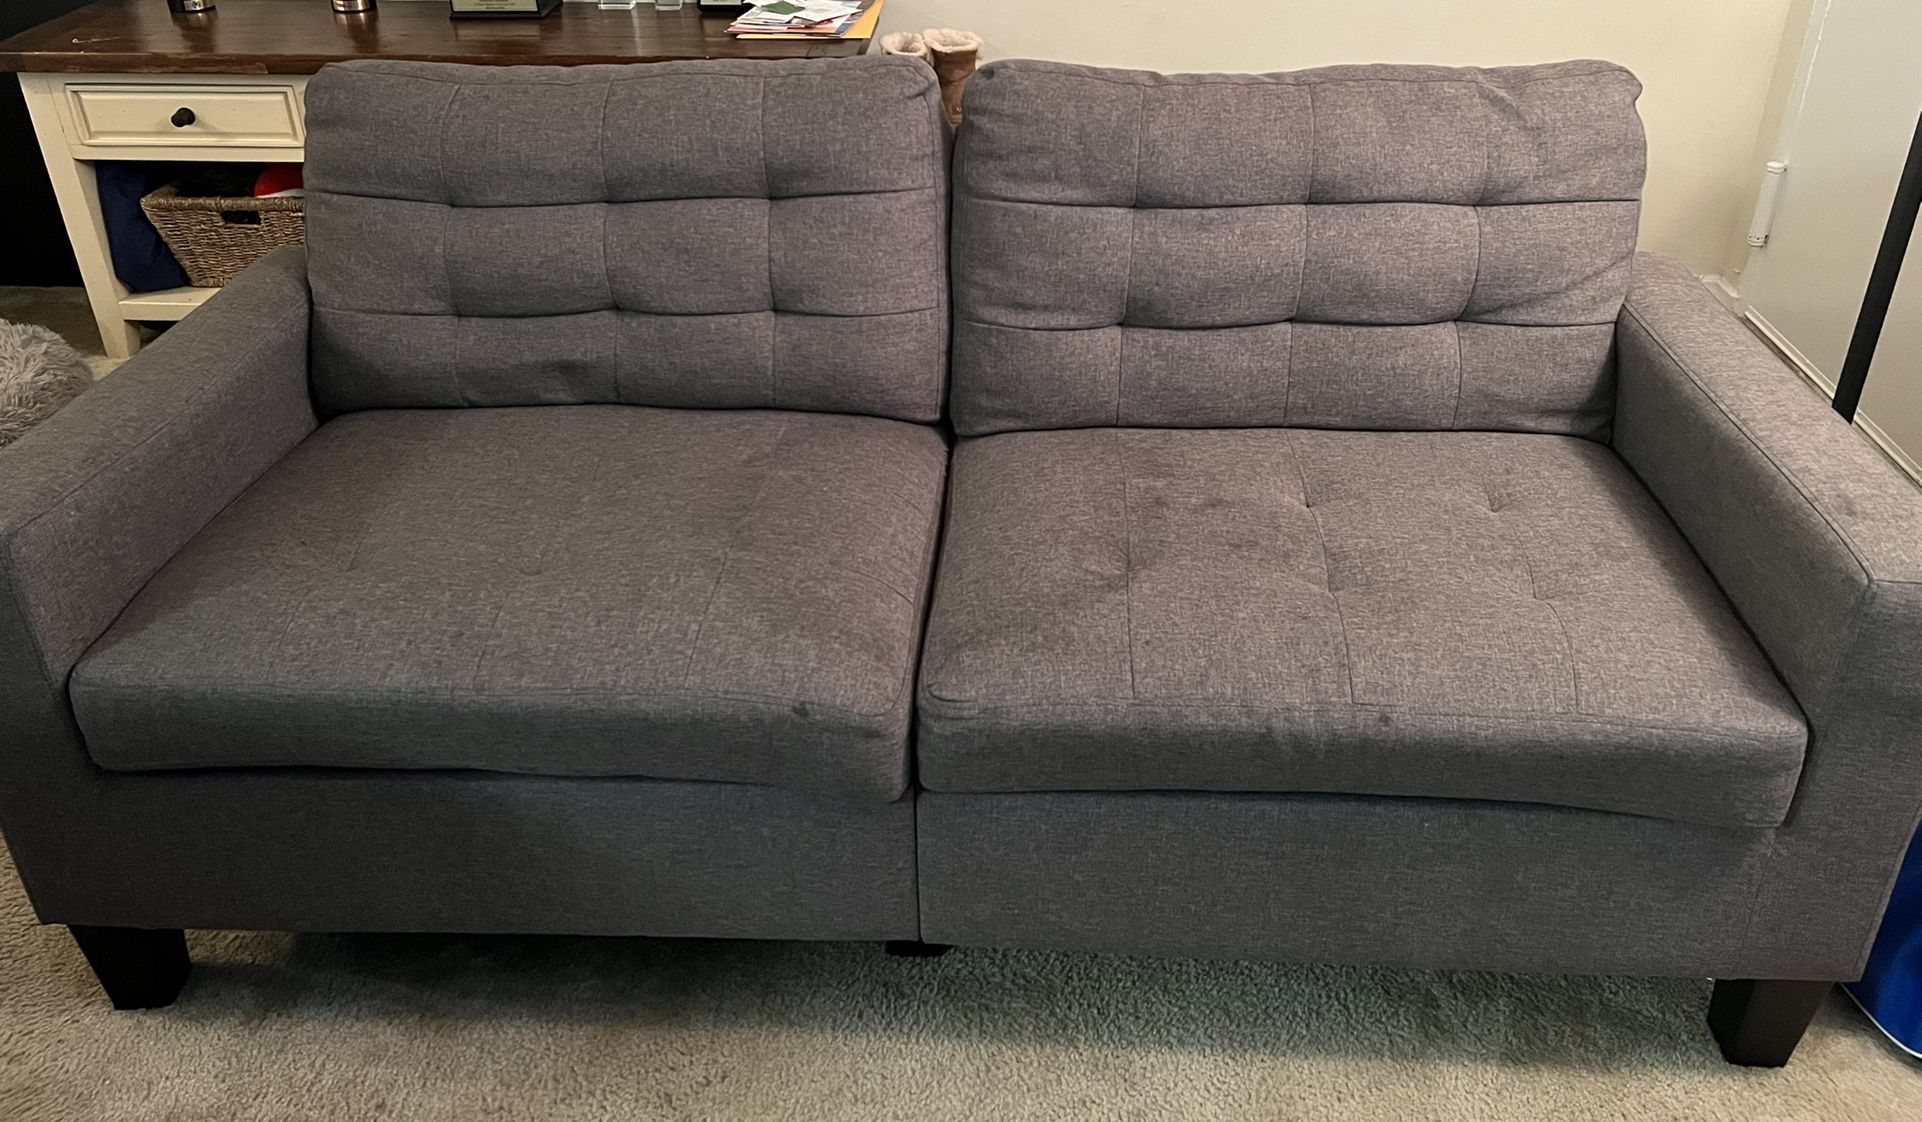 2 Couches Free!!! I’m Moving And Need Them Gone 